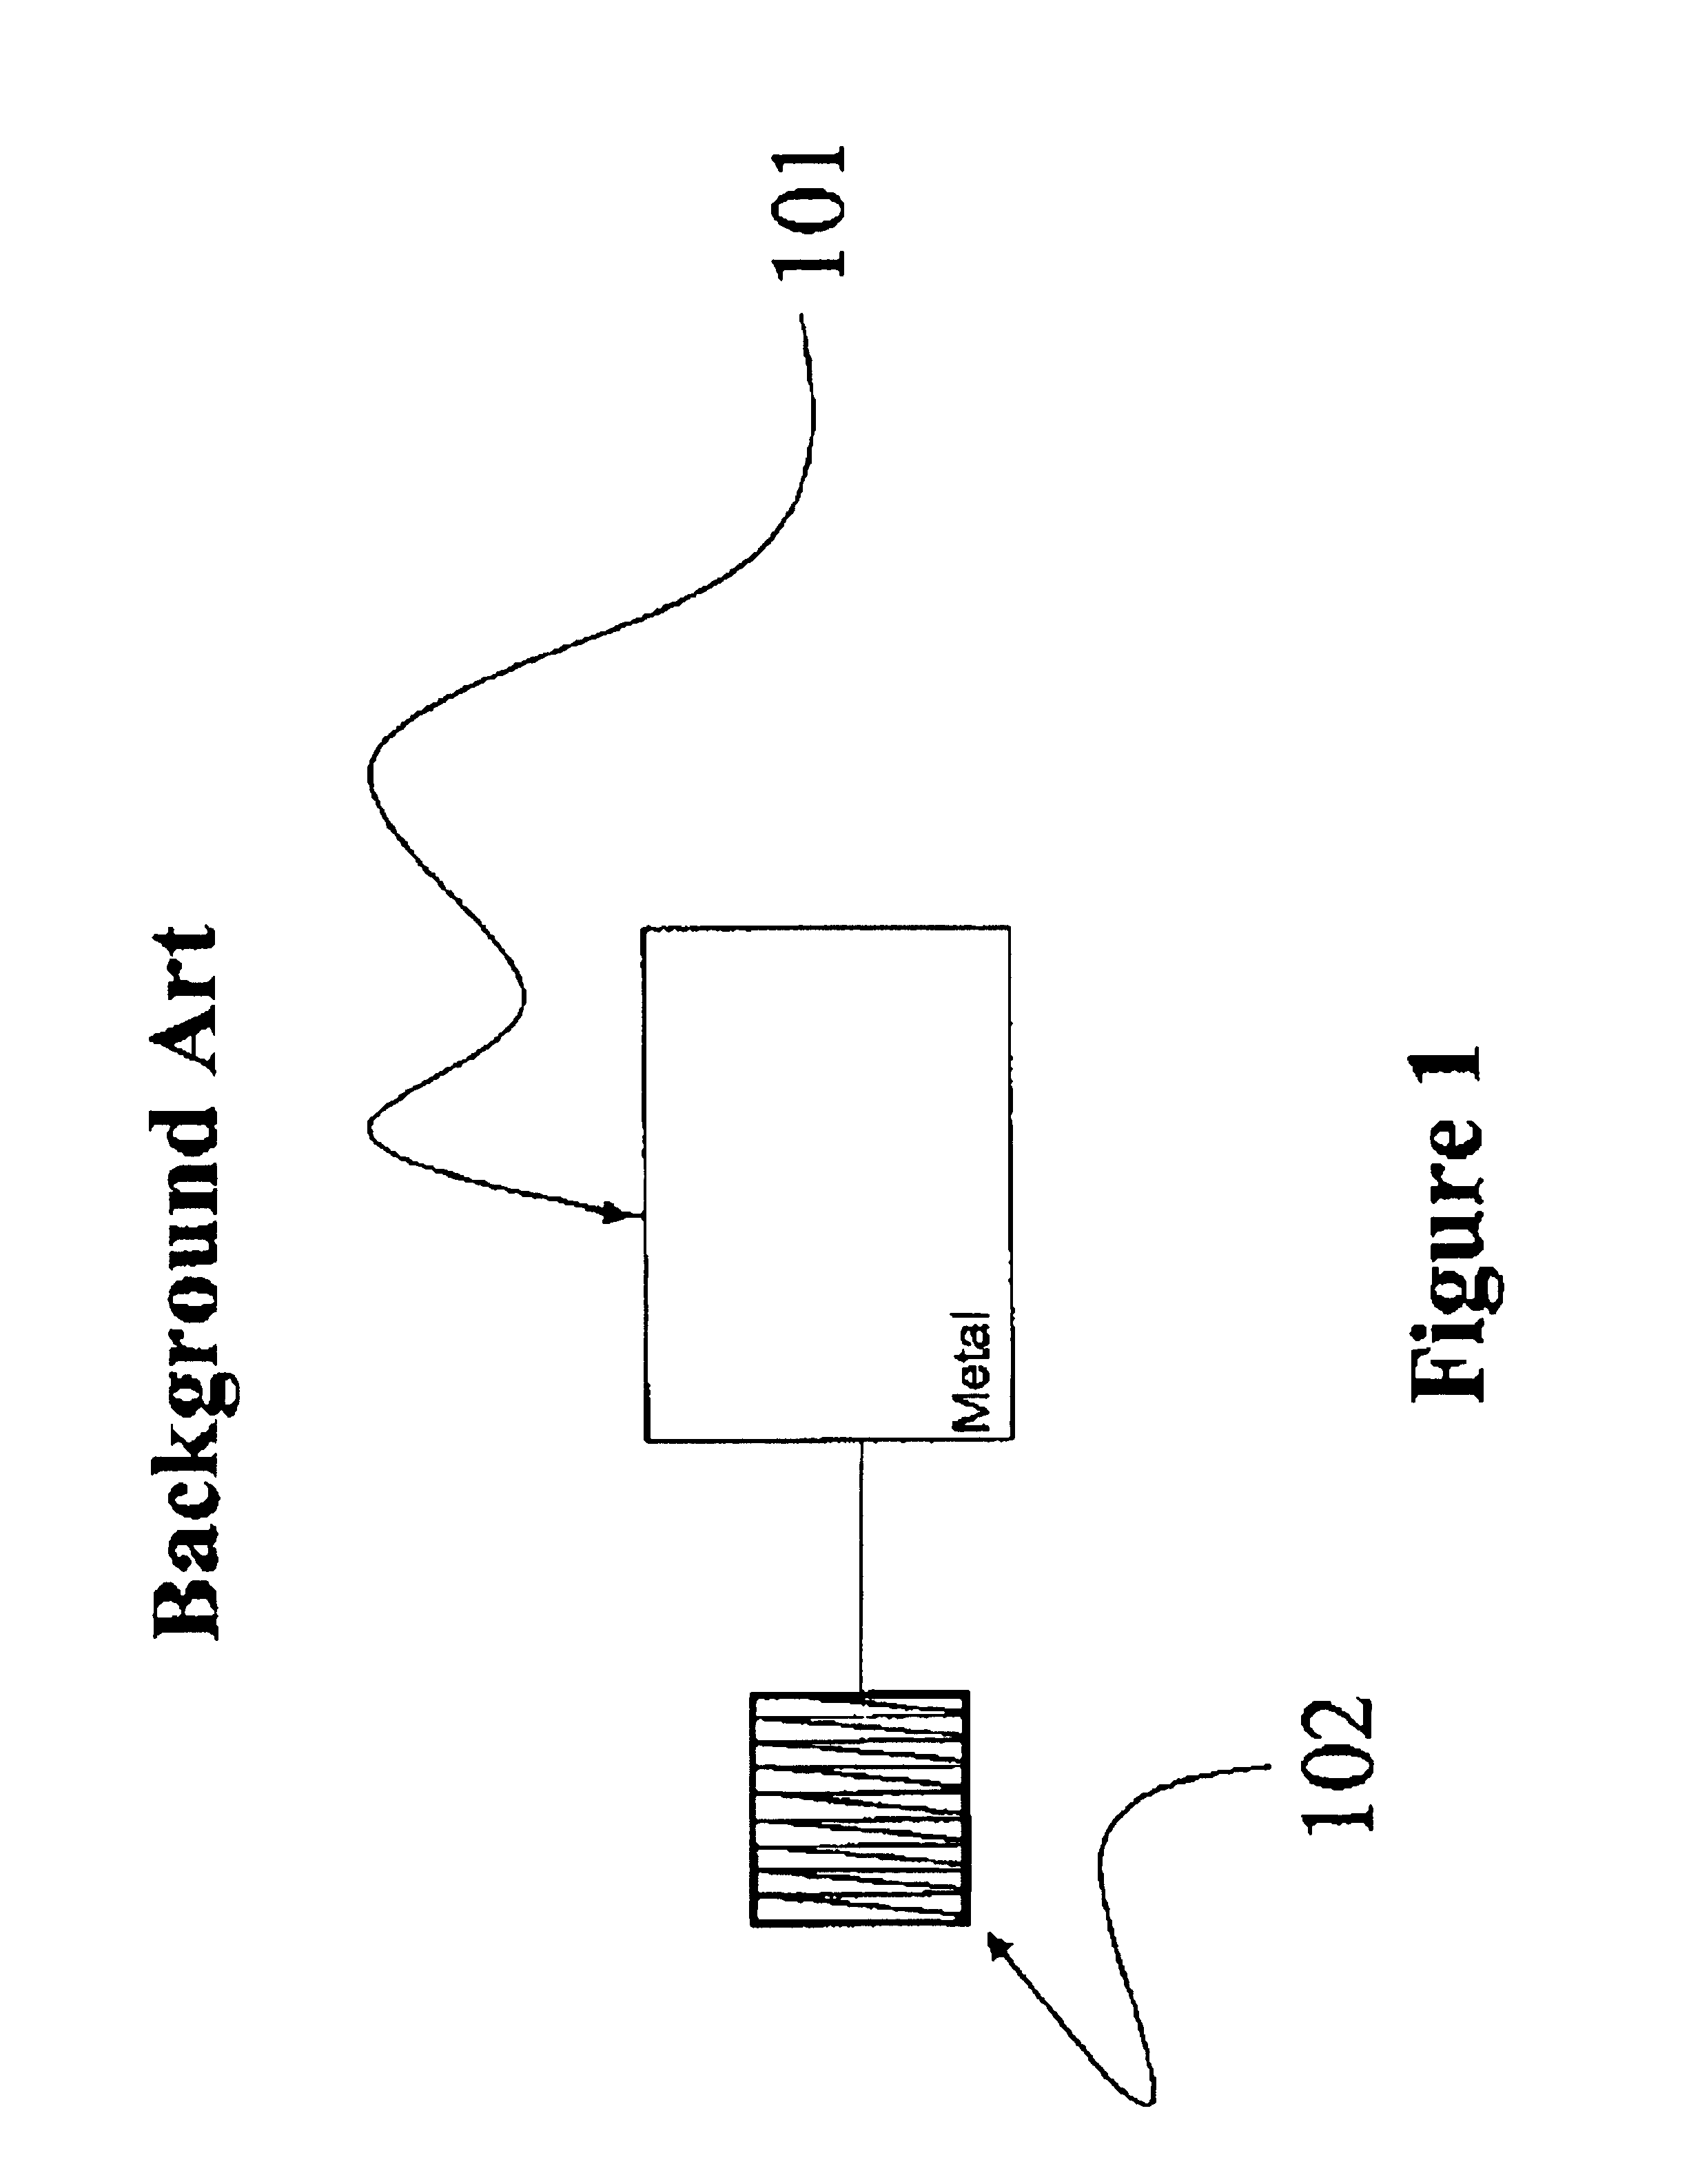 Apparatus, system and method for extending the life of sacrificial anodes on cathodic protection systems